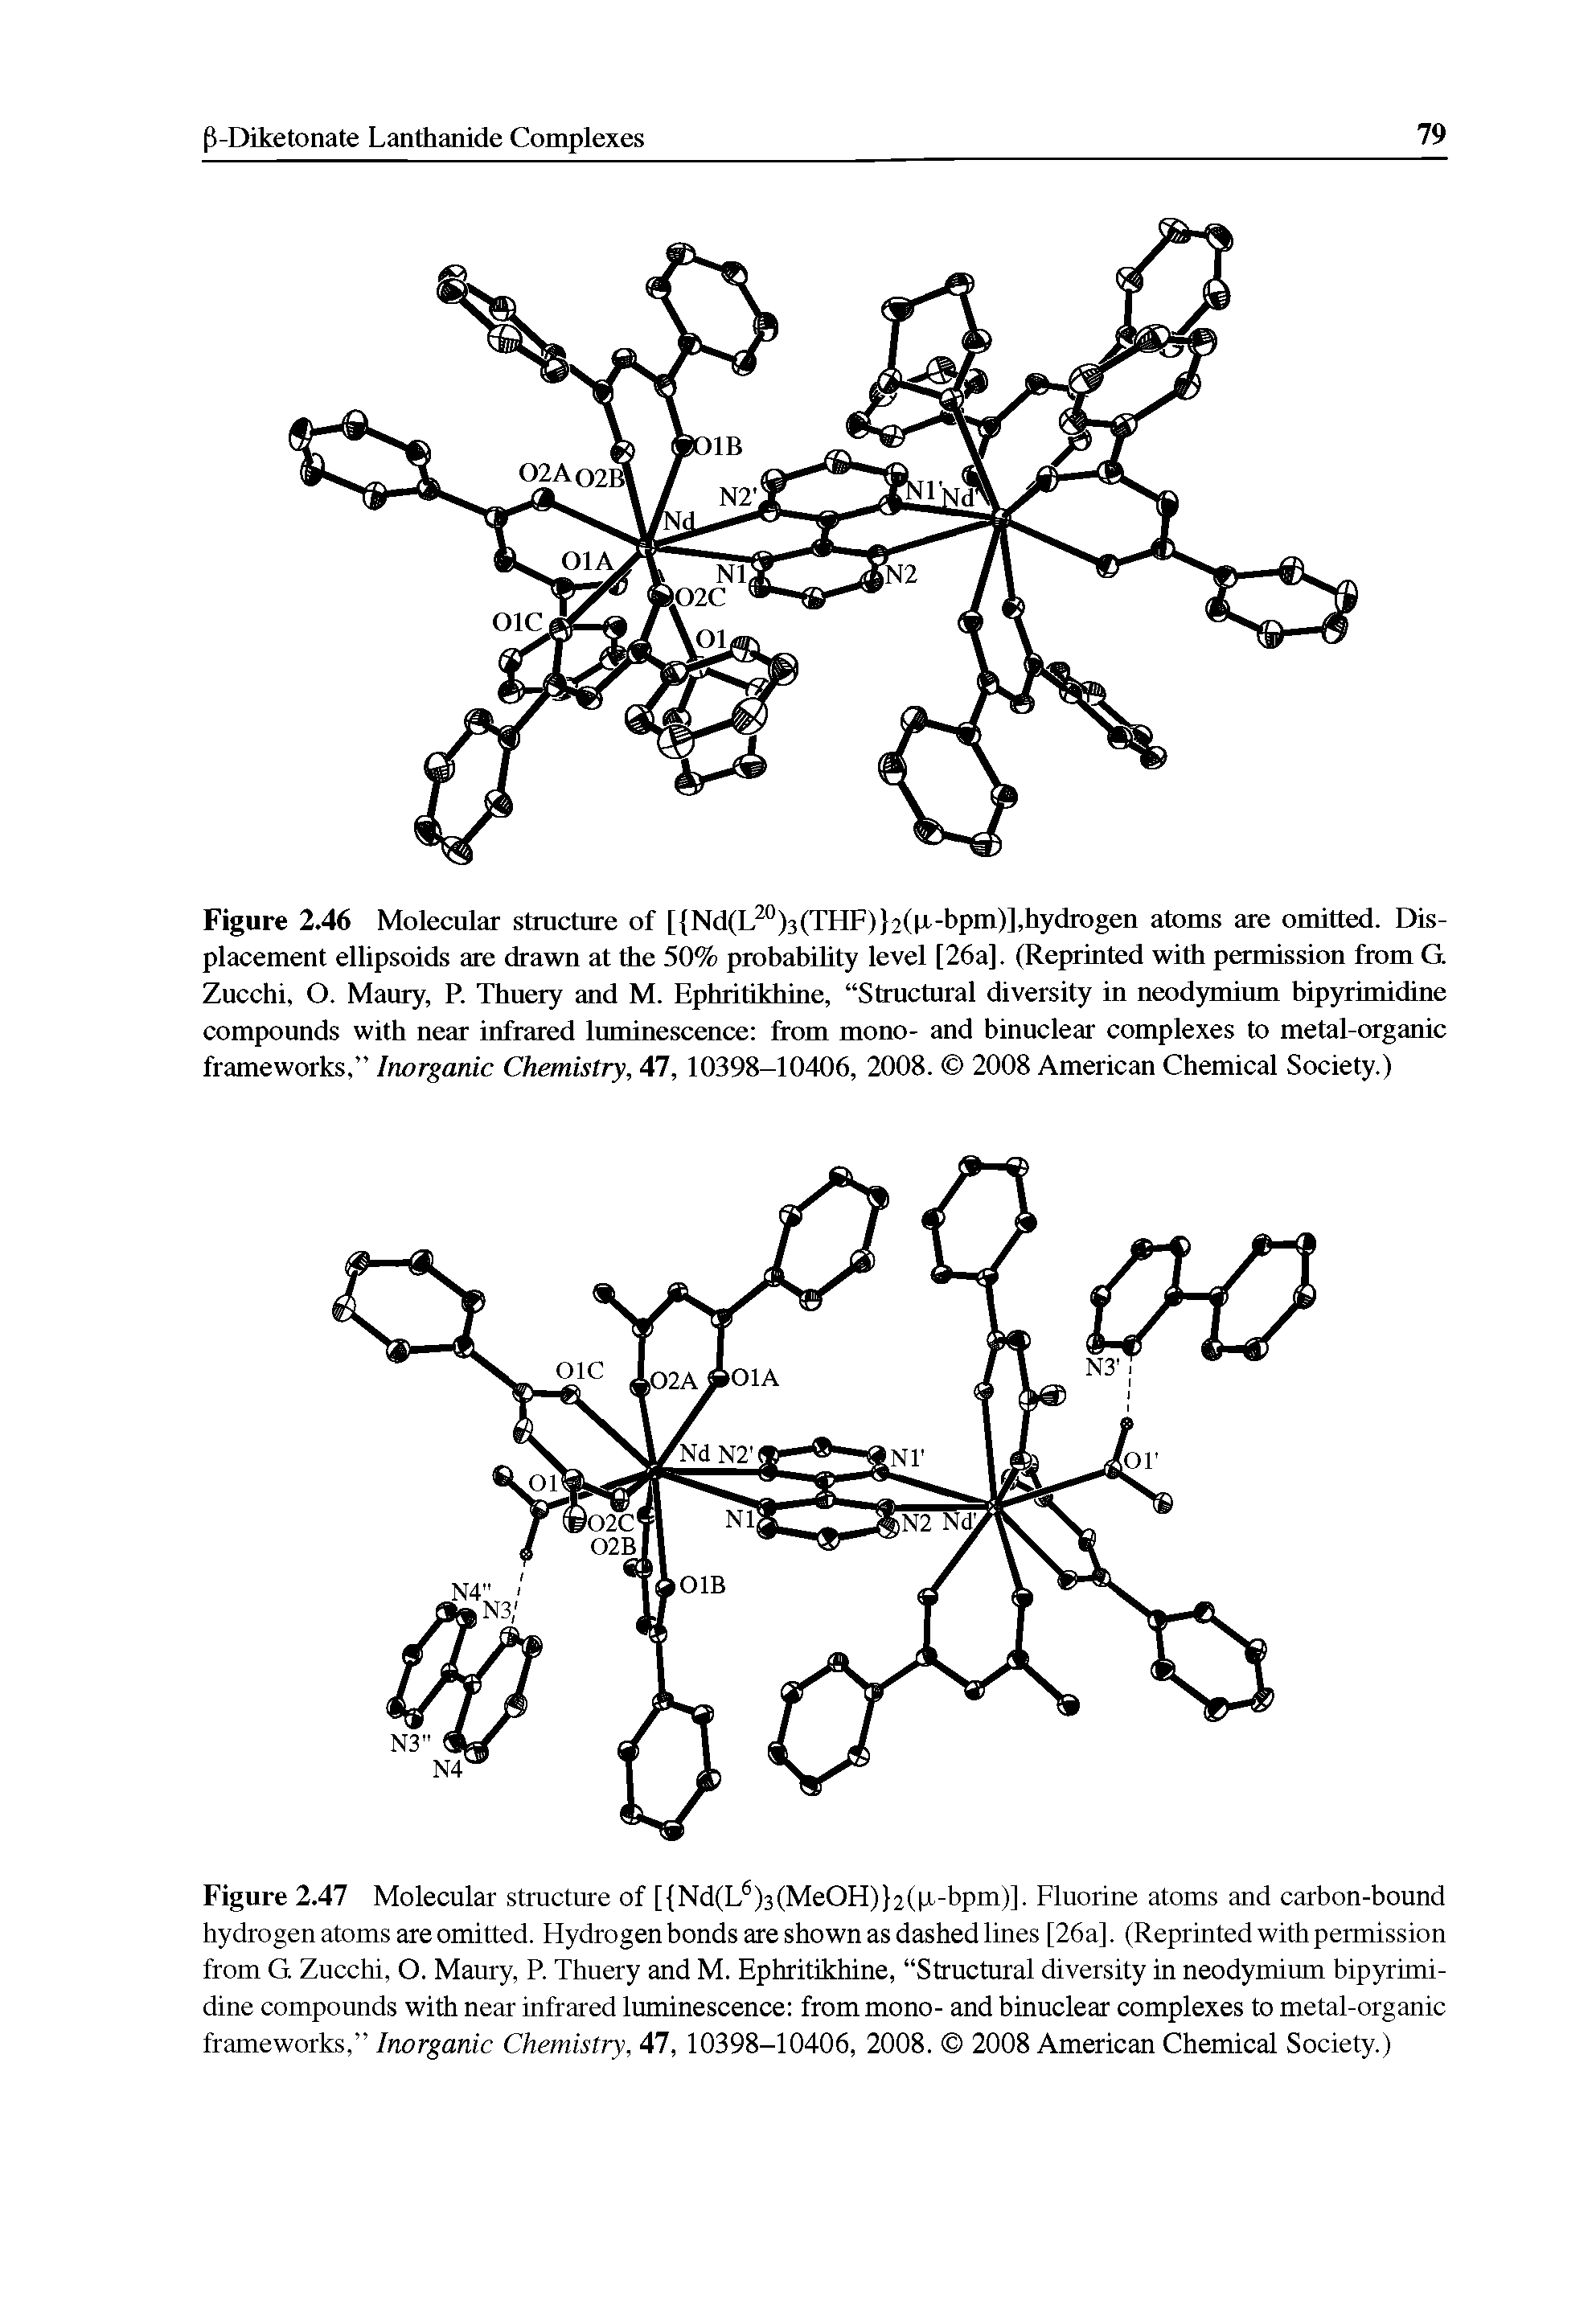 Figure 2.47 Molecular structure of [ Nd(L )3(MeOH) 2(fi-bpm)]. Fluorine atoms and carbon-bound hydrogen atoms are omitted. Hydrogen bonds are shown as dashed lines [26a]. (Reprinted with permission from G. Zucchi, O. Maury, P. Thuery and M. Ephritikhine, Structural diversity in neodymium bipyrimidine compounds with near infrared luminescence from mono- and binuclear complexes to metal-organic frameworks, Inorganic Chemistry, 47, 10398-10406, 2008. 2008 American Chemical Society.)...